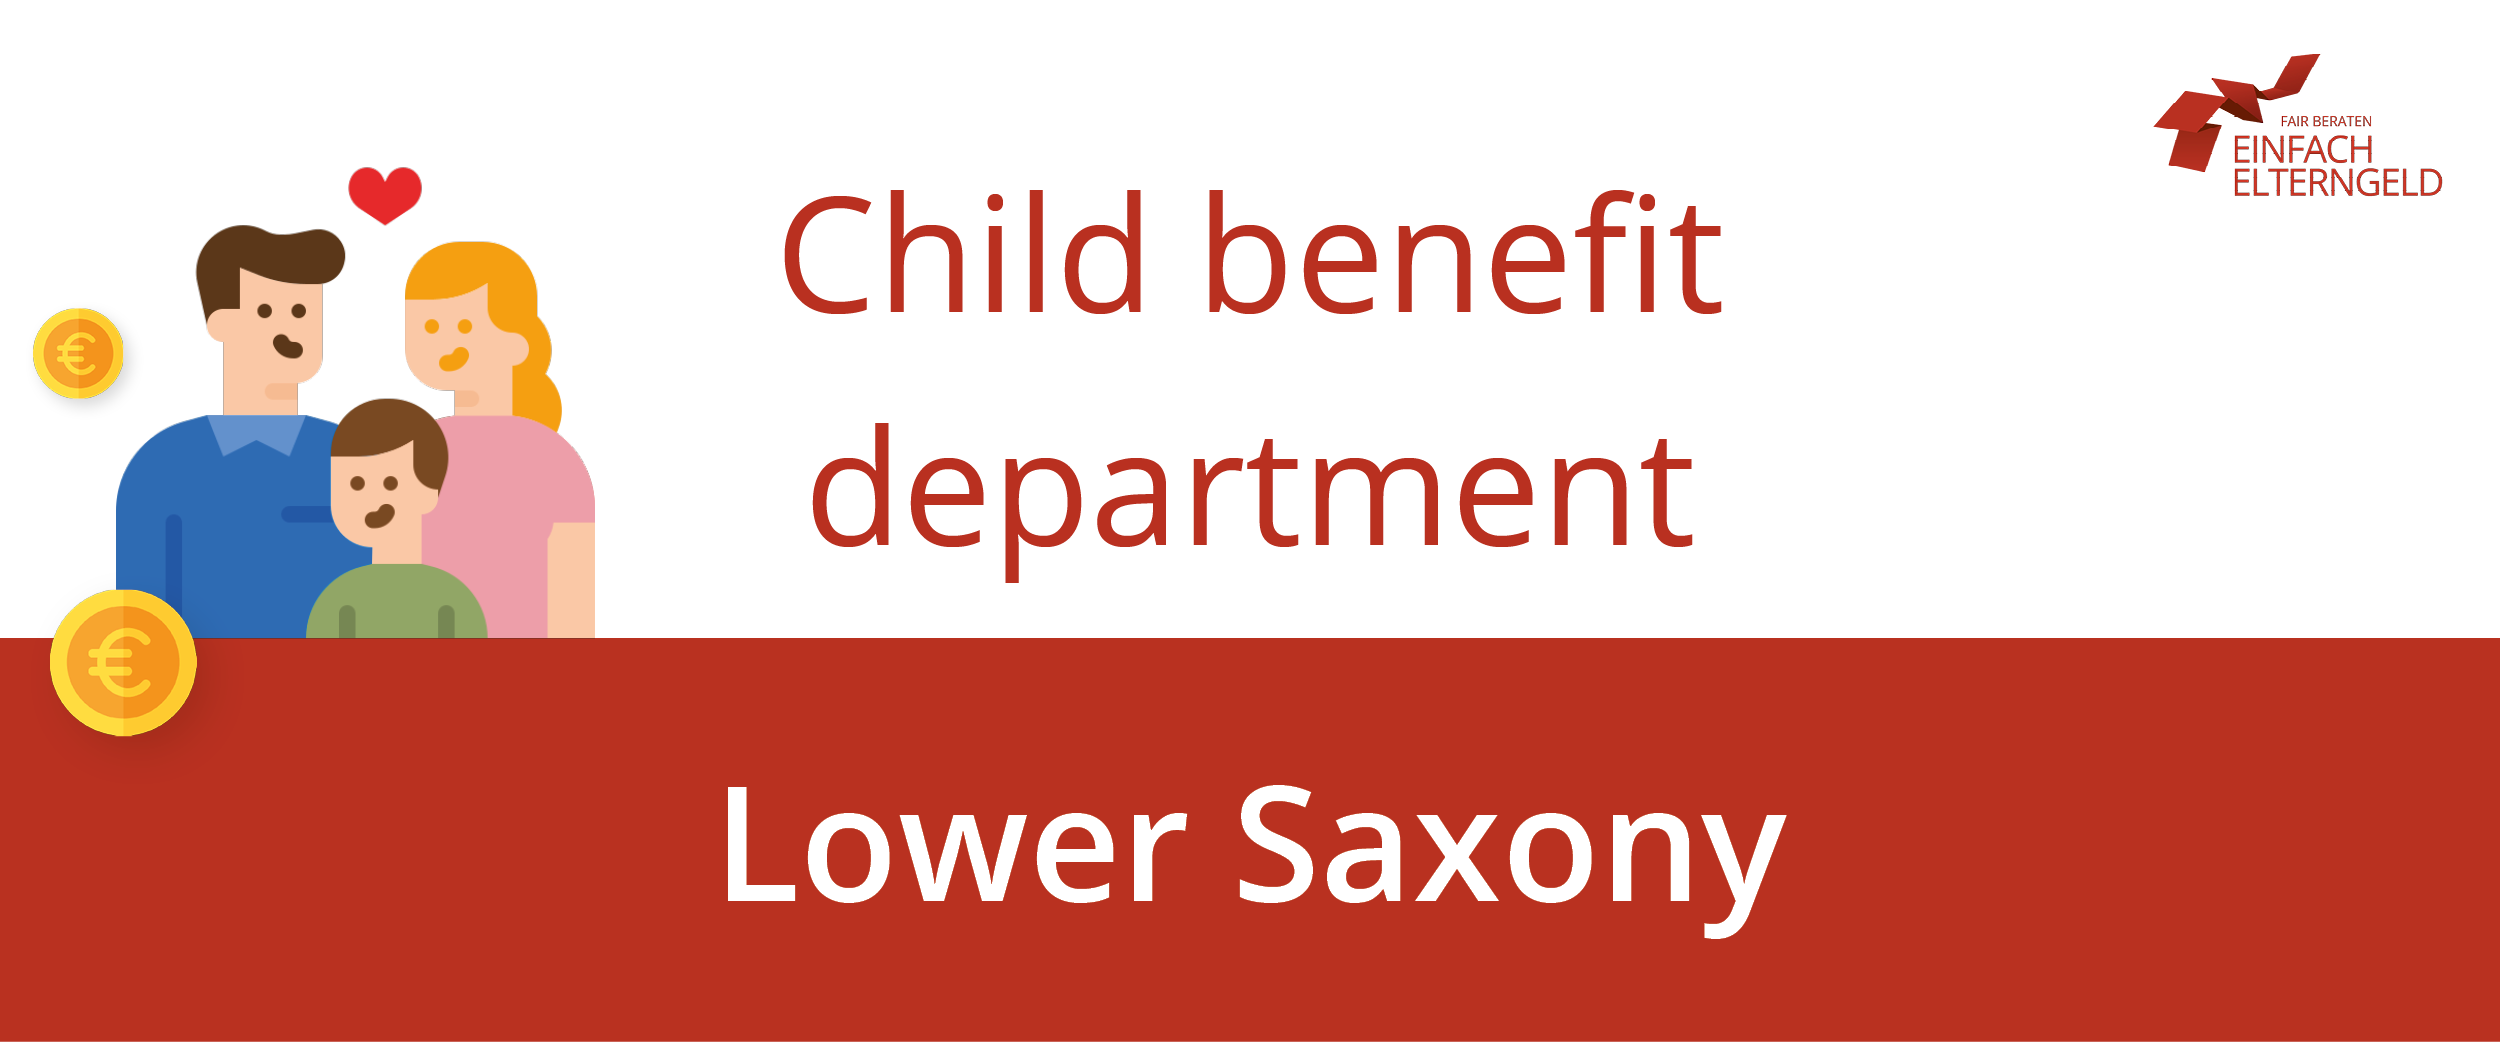 This is the child benefit department of Lower Saxony.